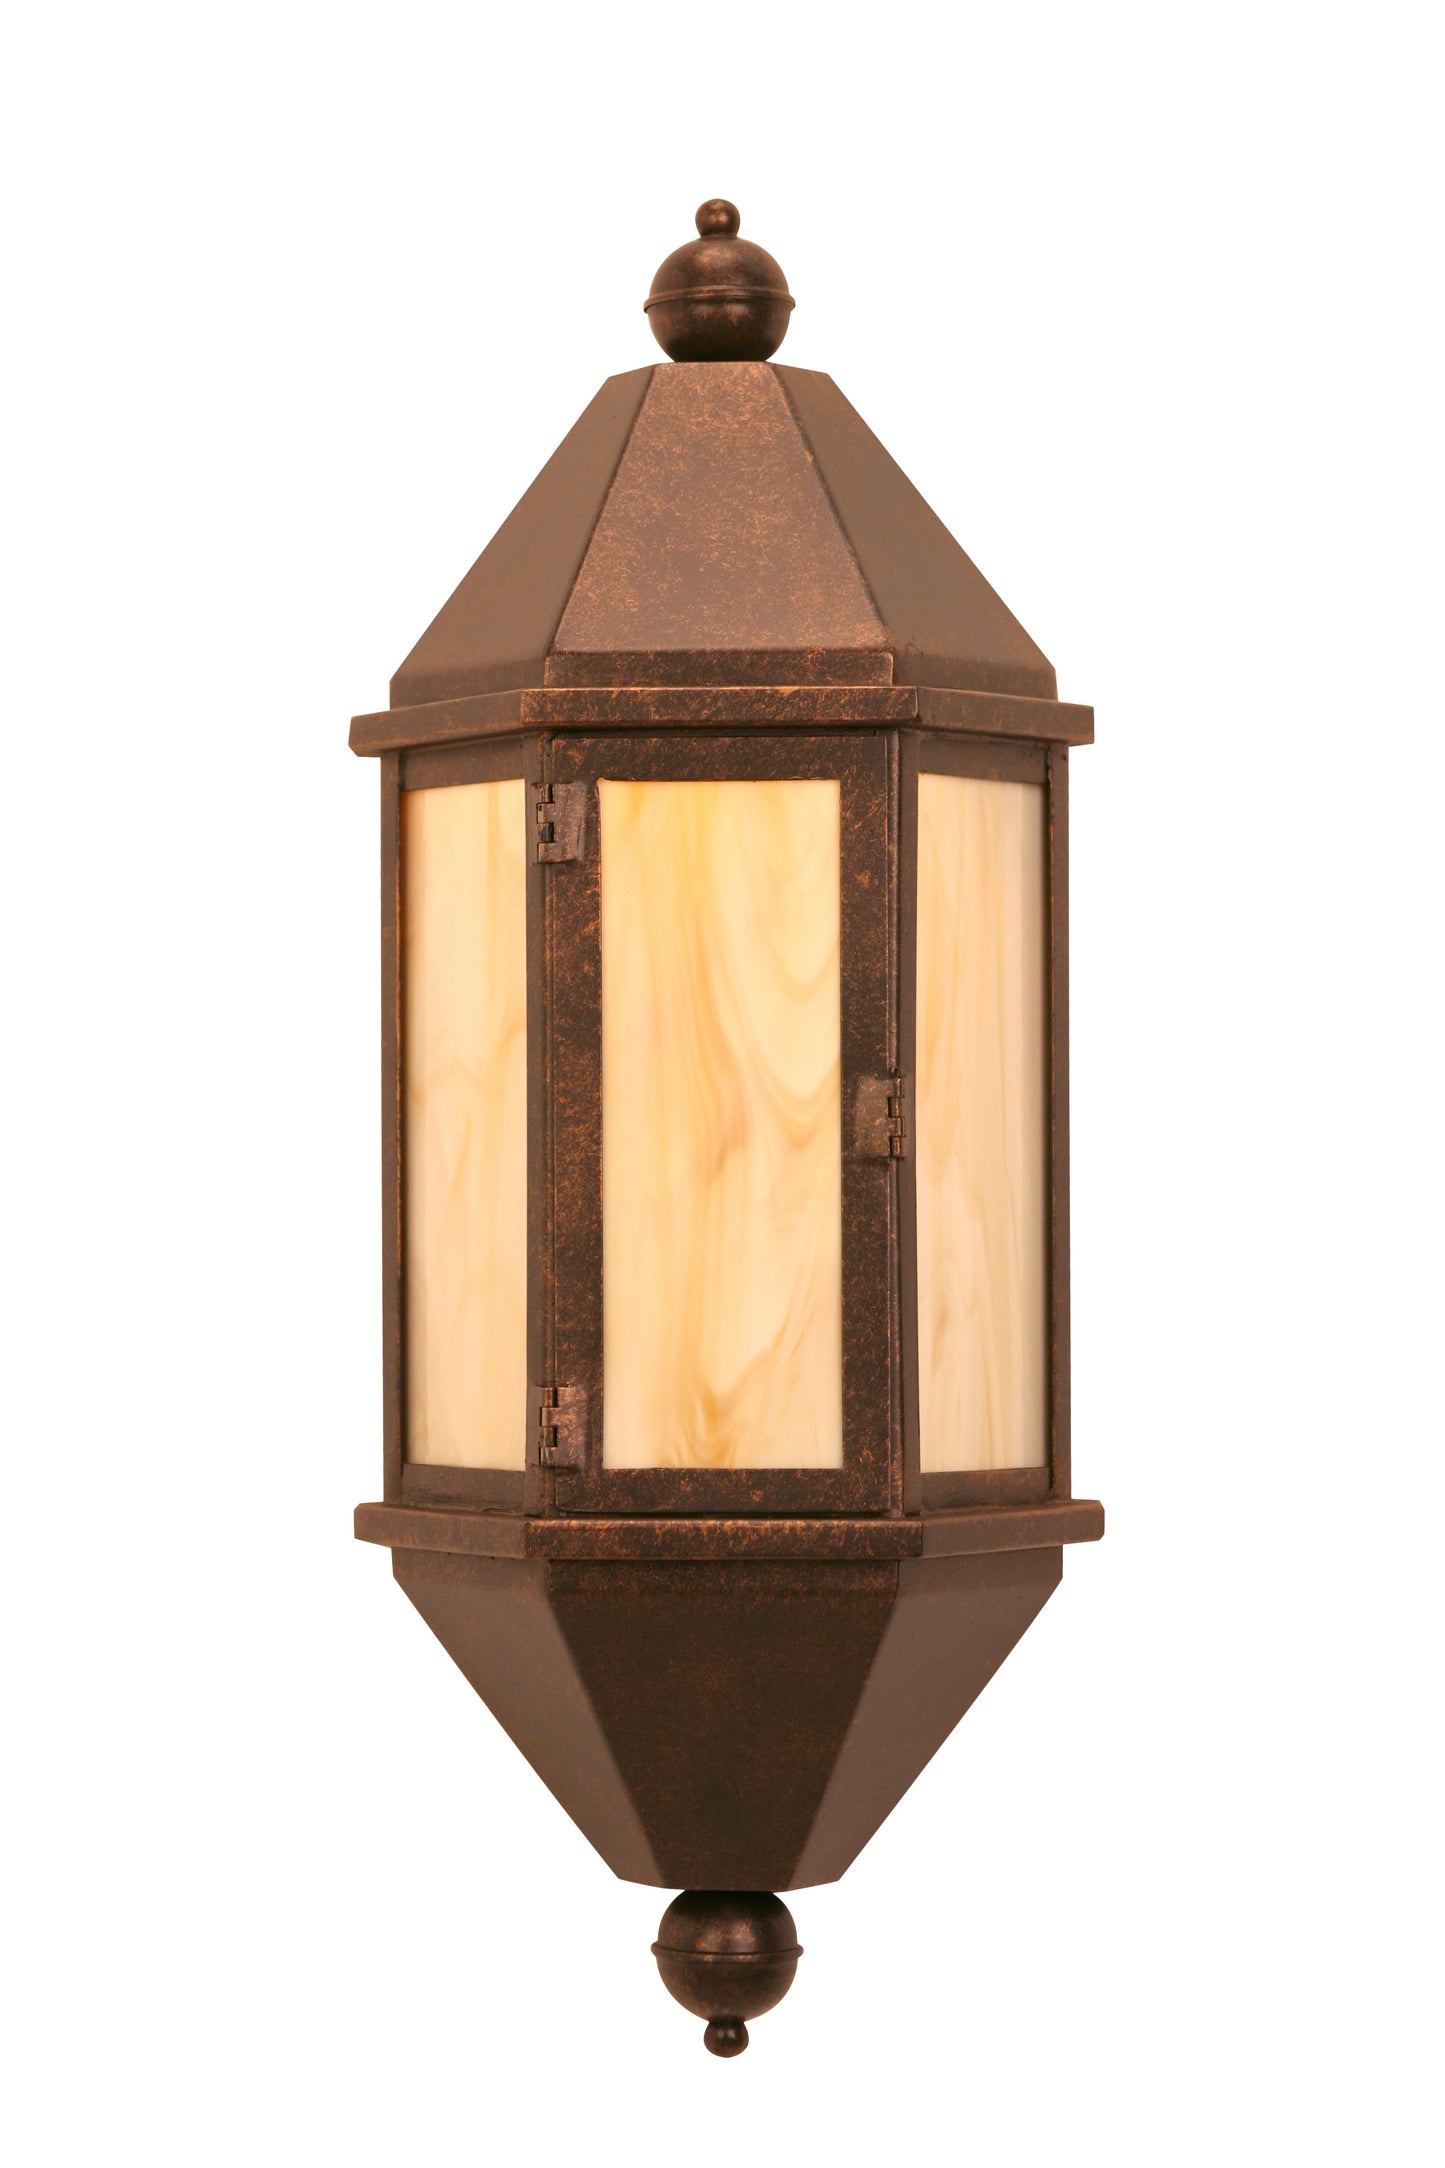 10" Plaza Lantern Wall Sconce by 2nd Ave Lighting